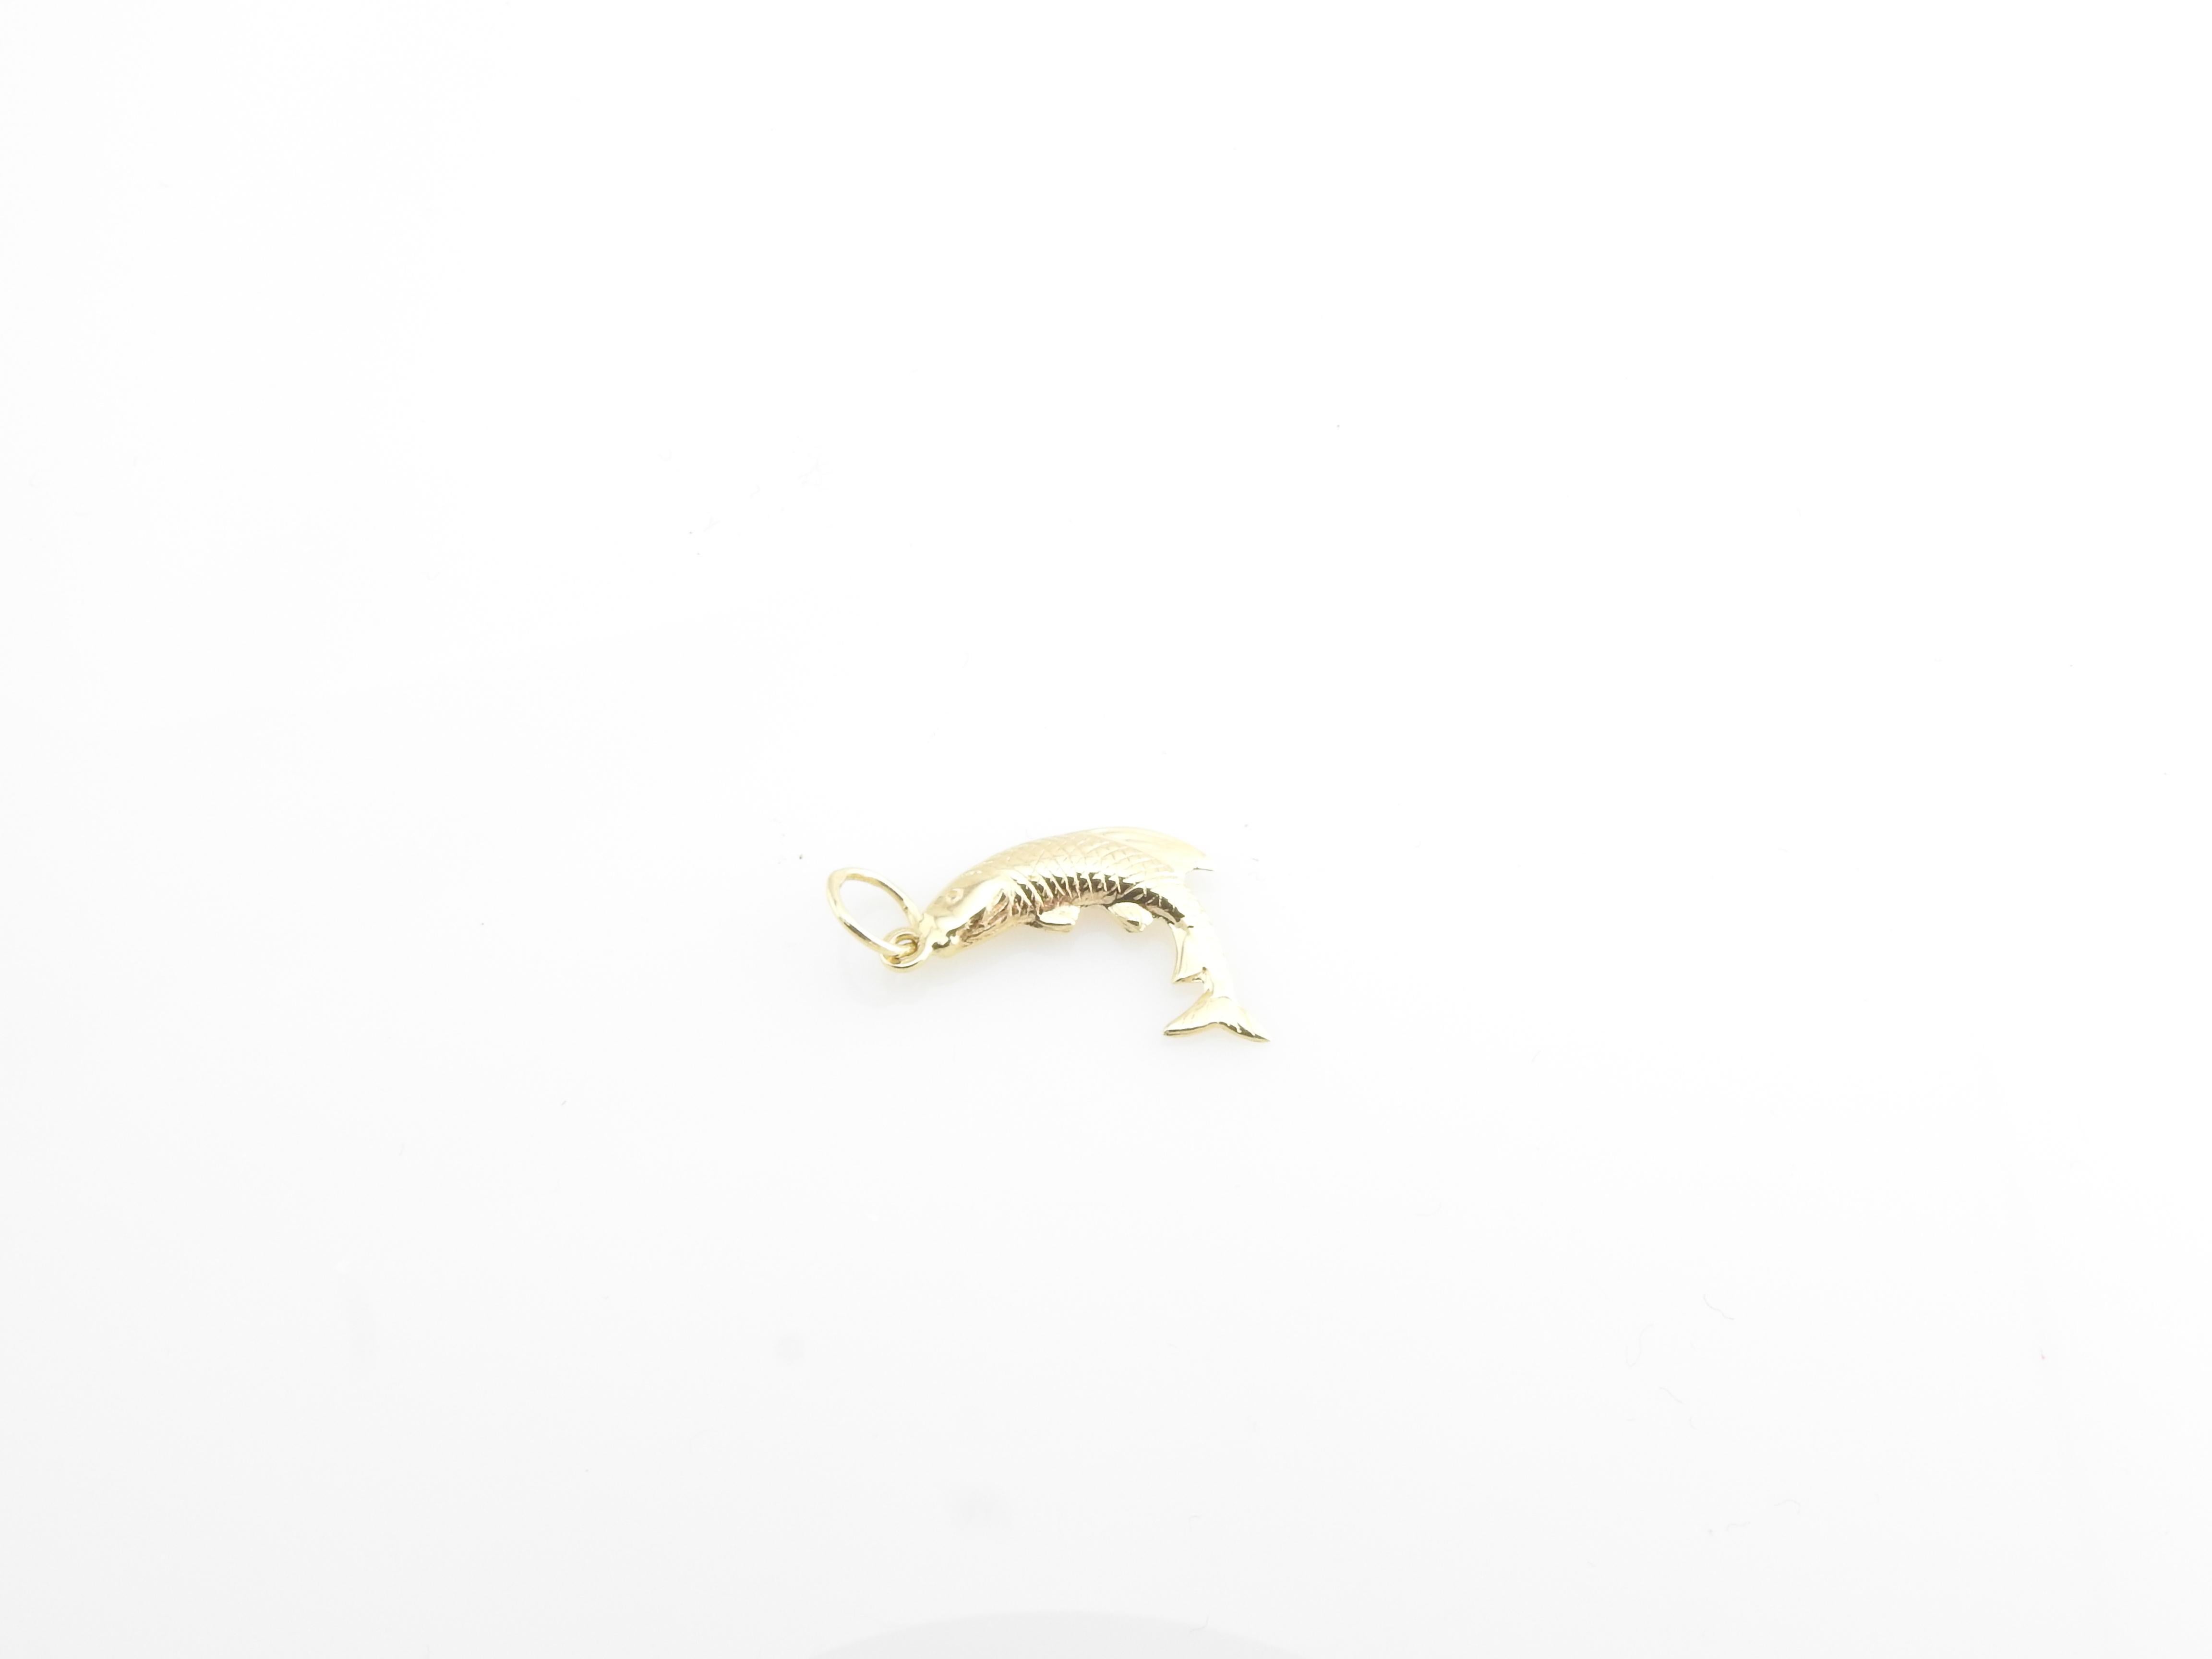 Vintage 14 Karat Yellow Gold Fish Charm

Perfect for the fishing enthusiast!

This lovely charm features a trout in motion meticulously detailed in 14K yellow gold.

Size: 18 mm x 10 mm - actual charm.

Weight: 0.2 dwt. / 0.4 gr.

Stamped: 14K

Very